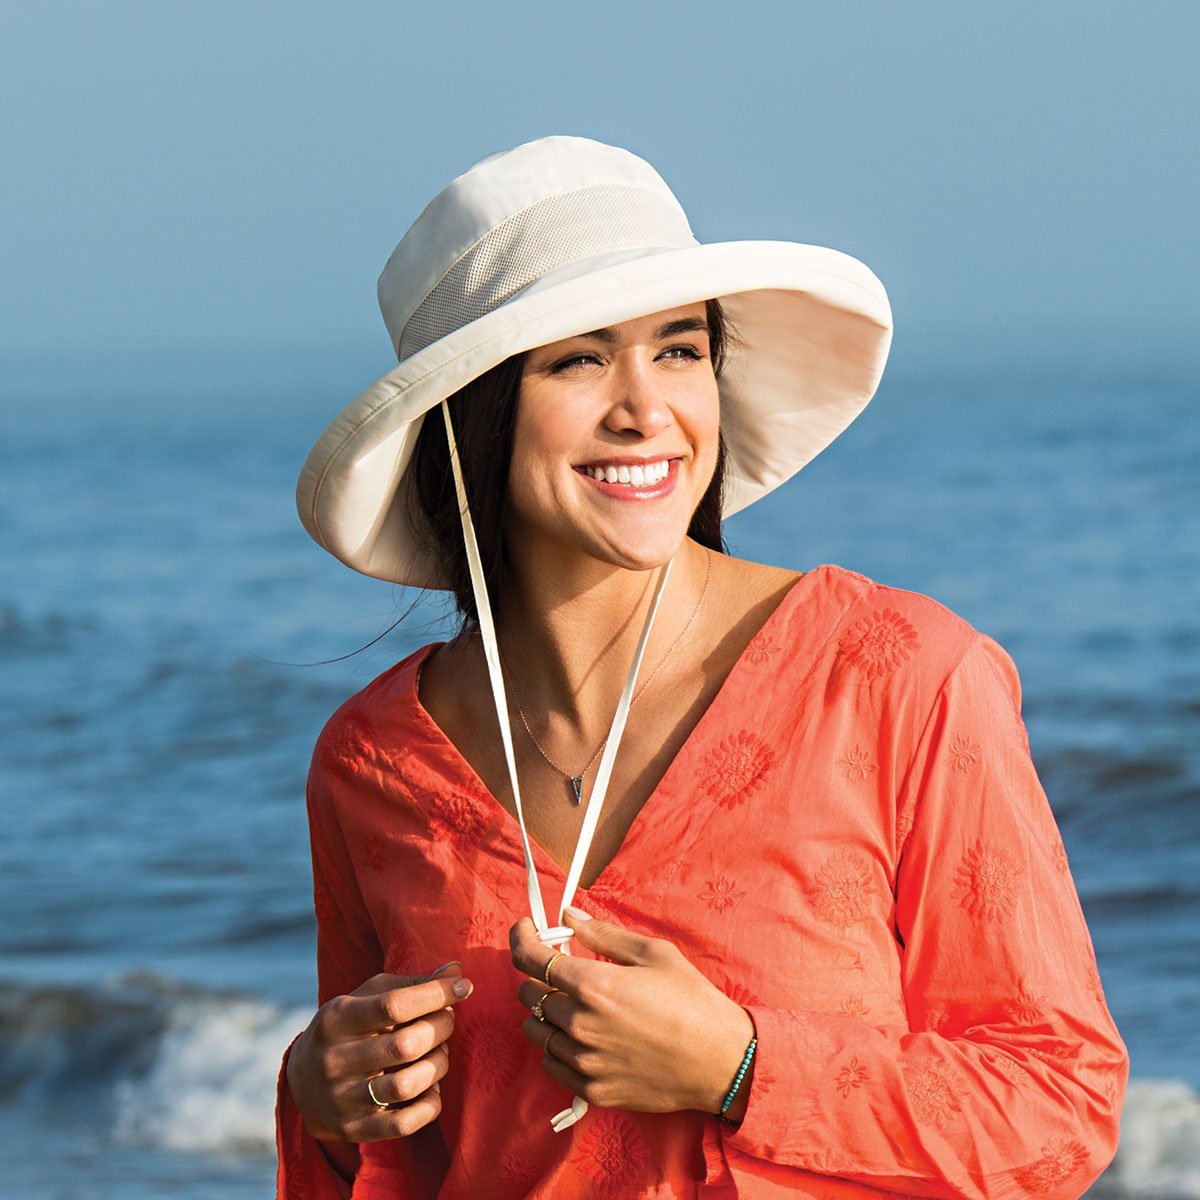 Solid Turquoise Floppy Sun Hat